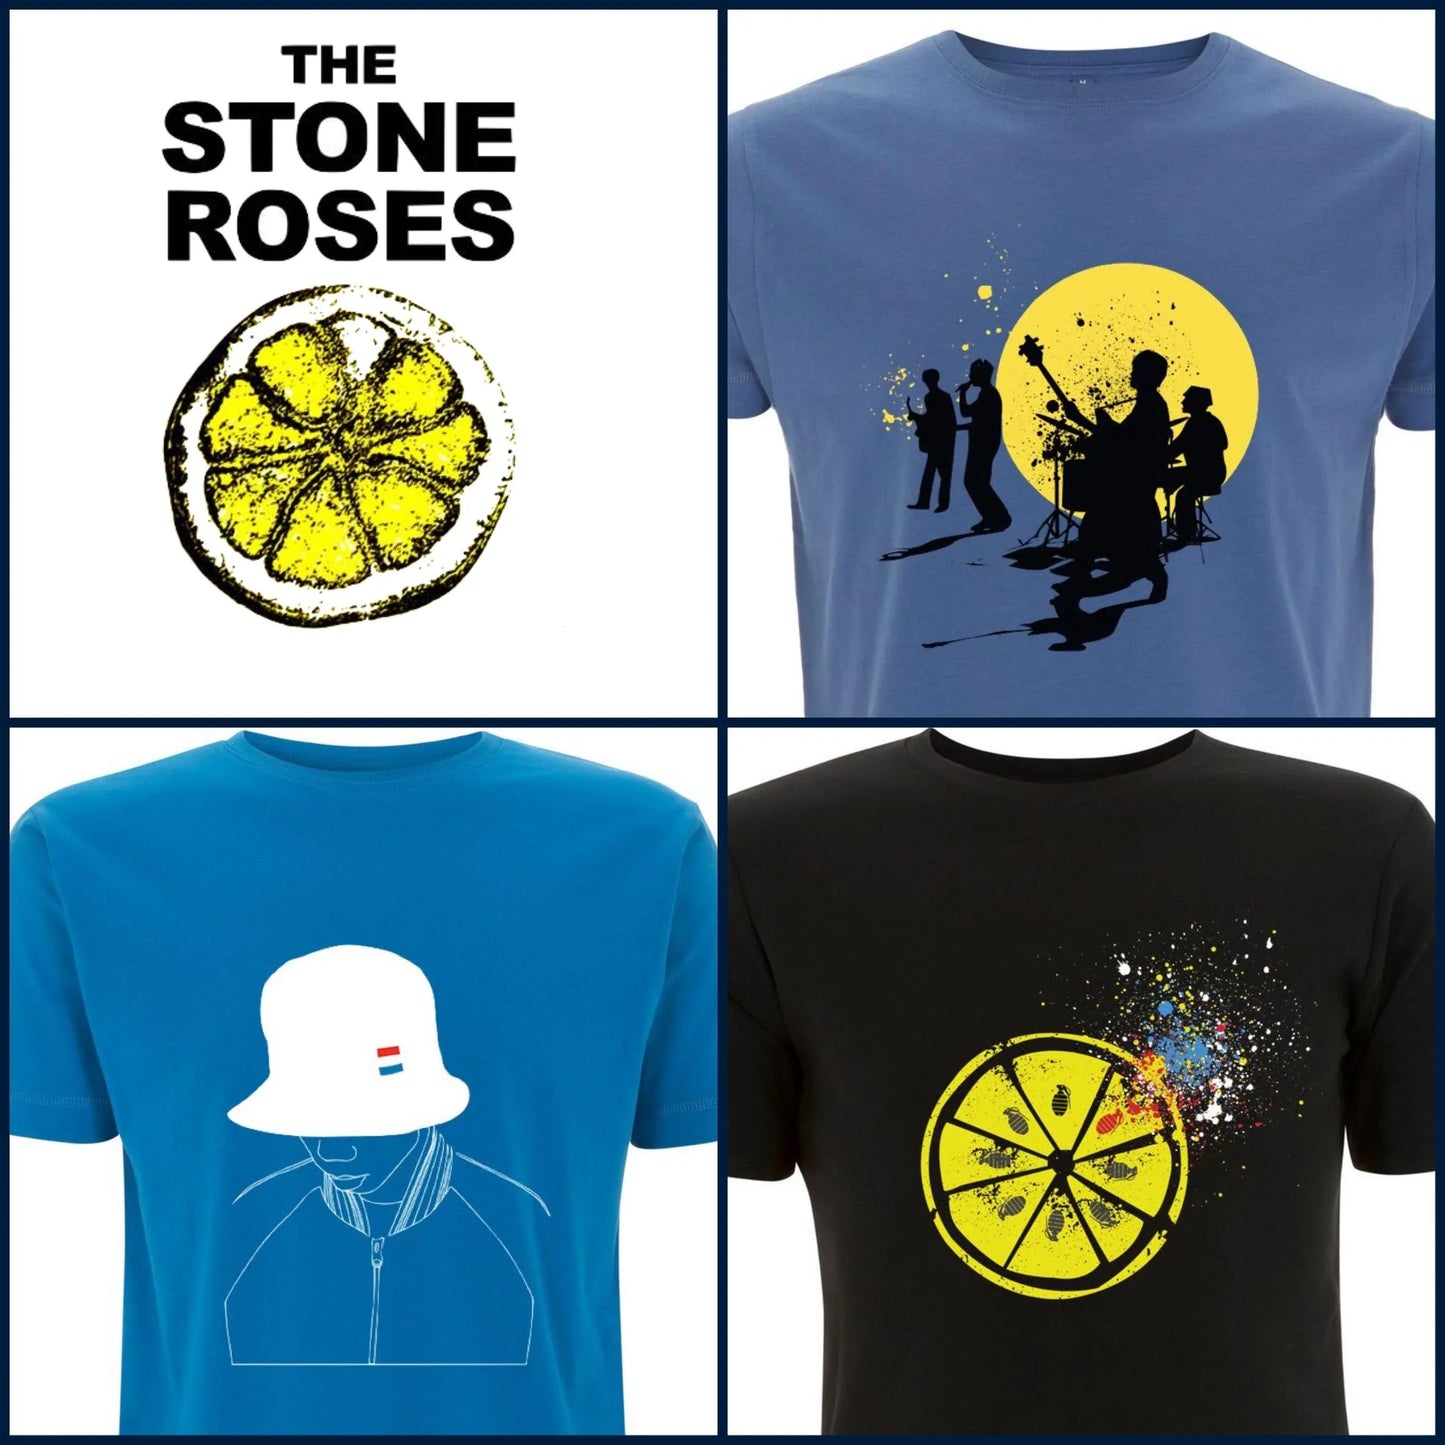 EXPLOSIVE LEMON: T-Shirt Inspired by The Stone Roses - SOUND IS COLOUR